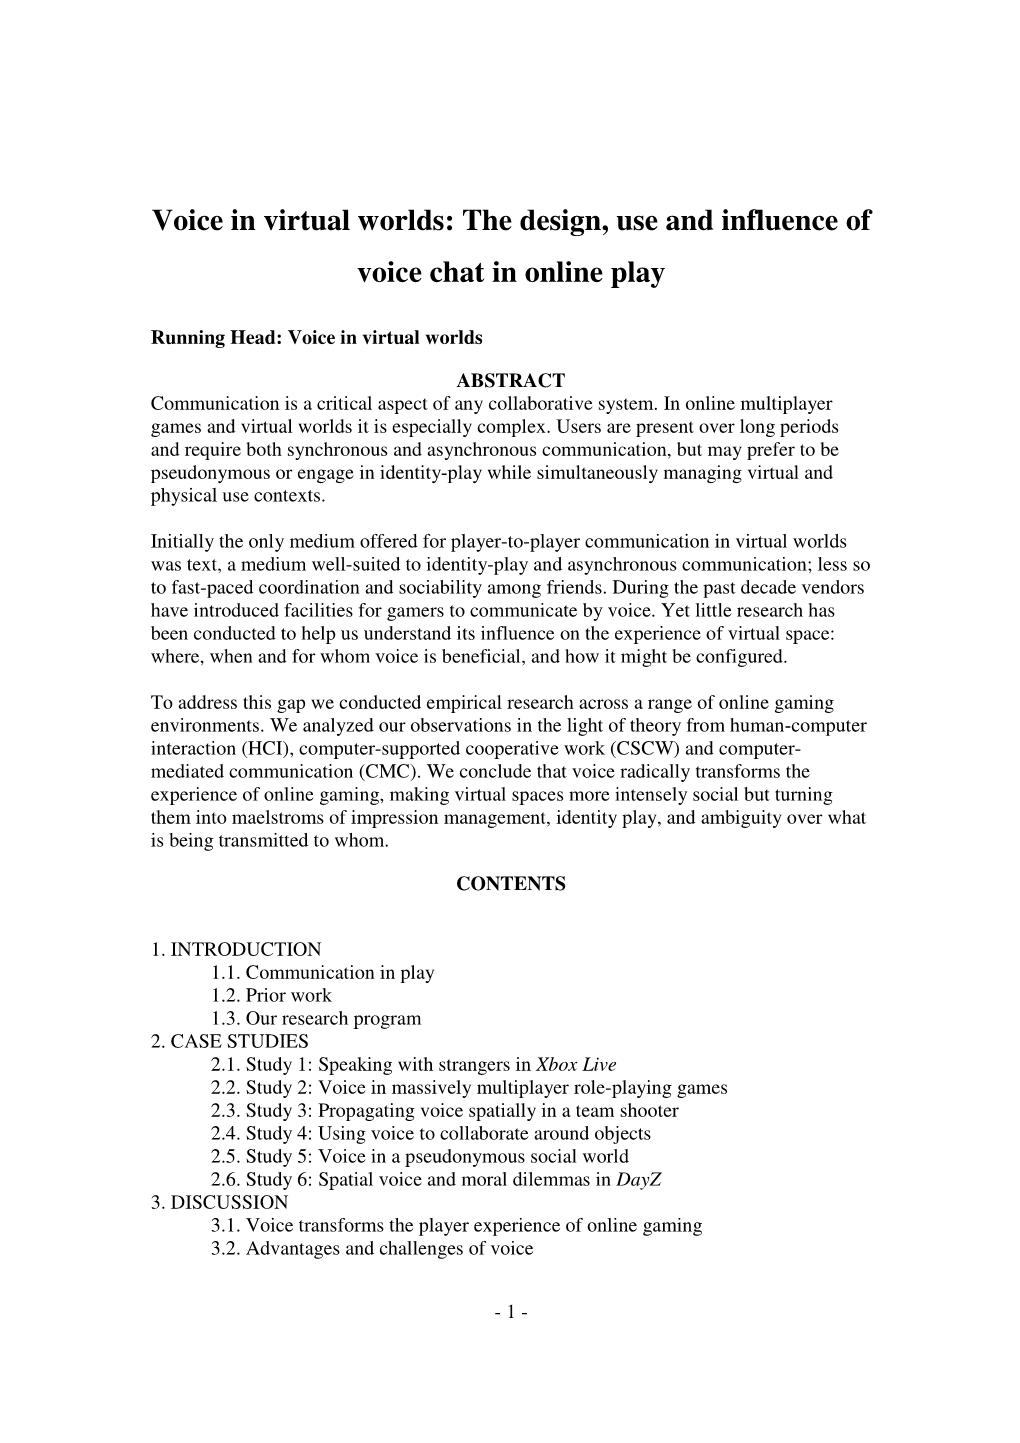 Voice in Virtual Worlds: the Design, Use and Influence of Voice Chat in Online Play